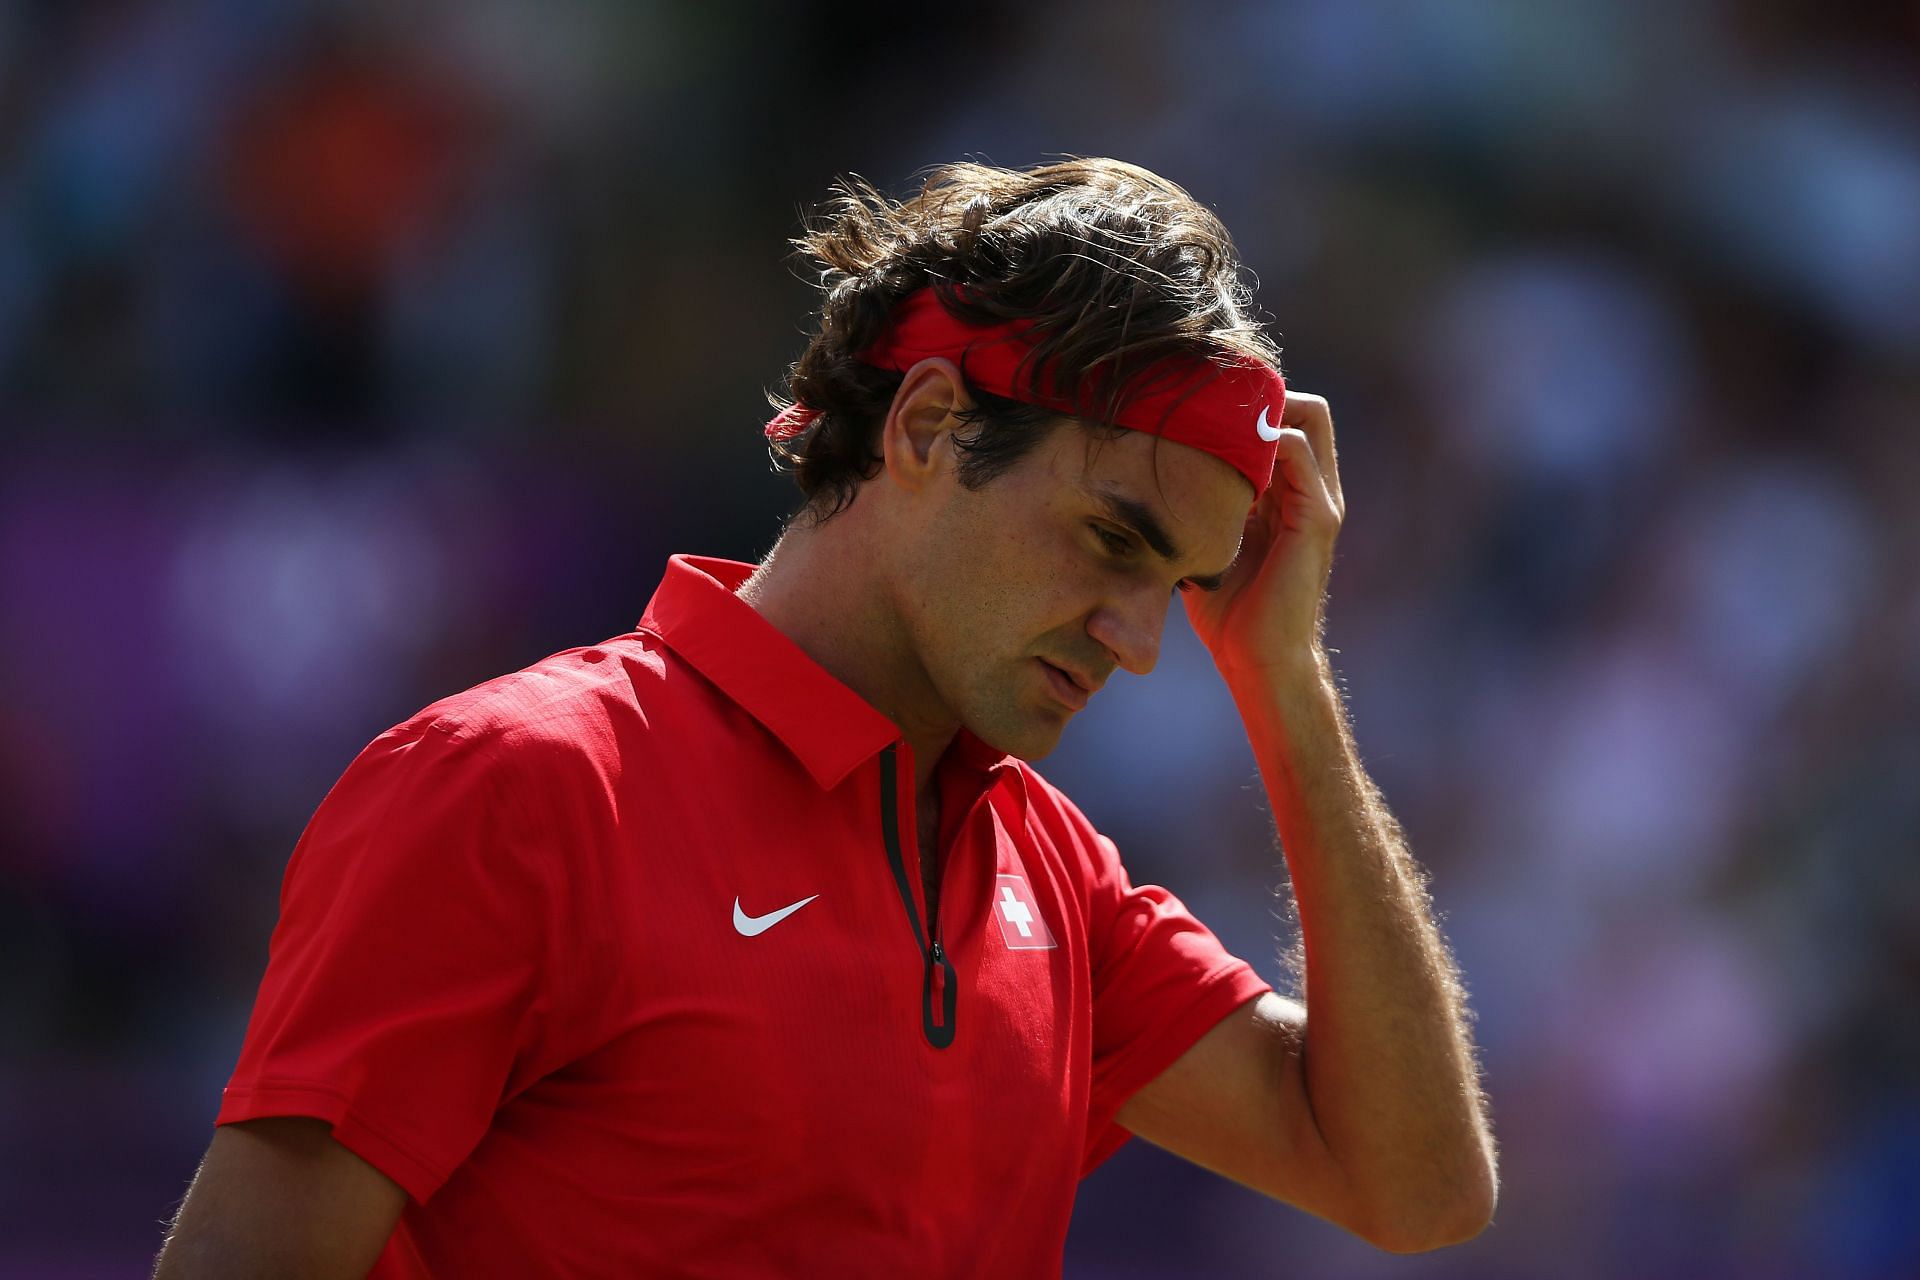 Roger Federer during his gold medal match against Andy Murray at the 2012 London Olympics